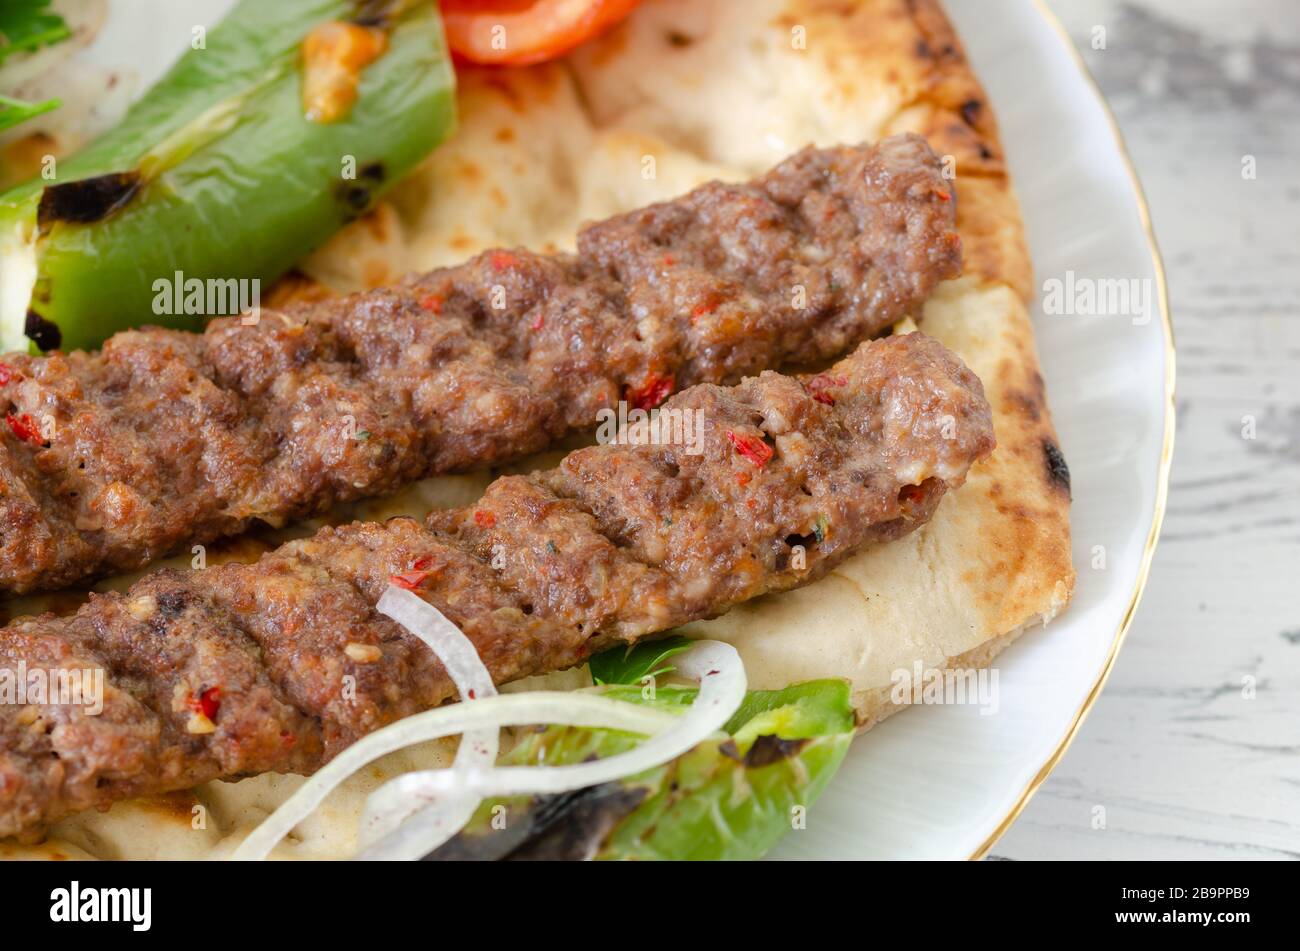 Traditional Adana Kebap with tomato and salad on a flatbread as top view. Stock Photo